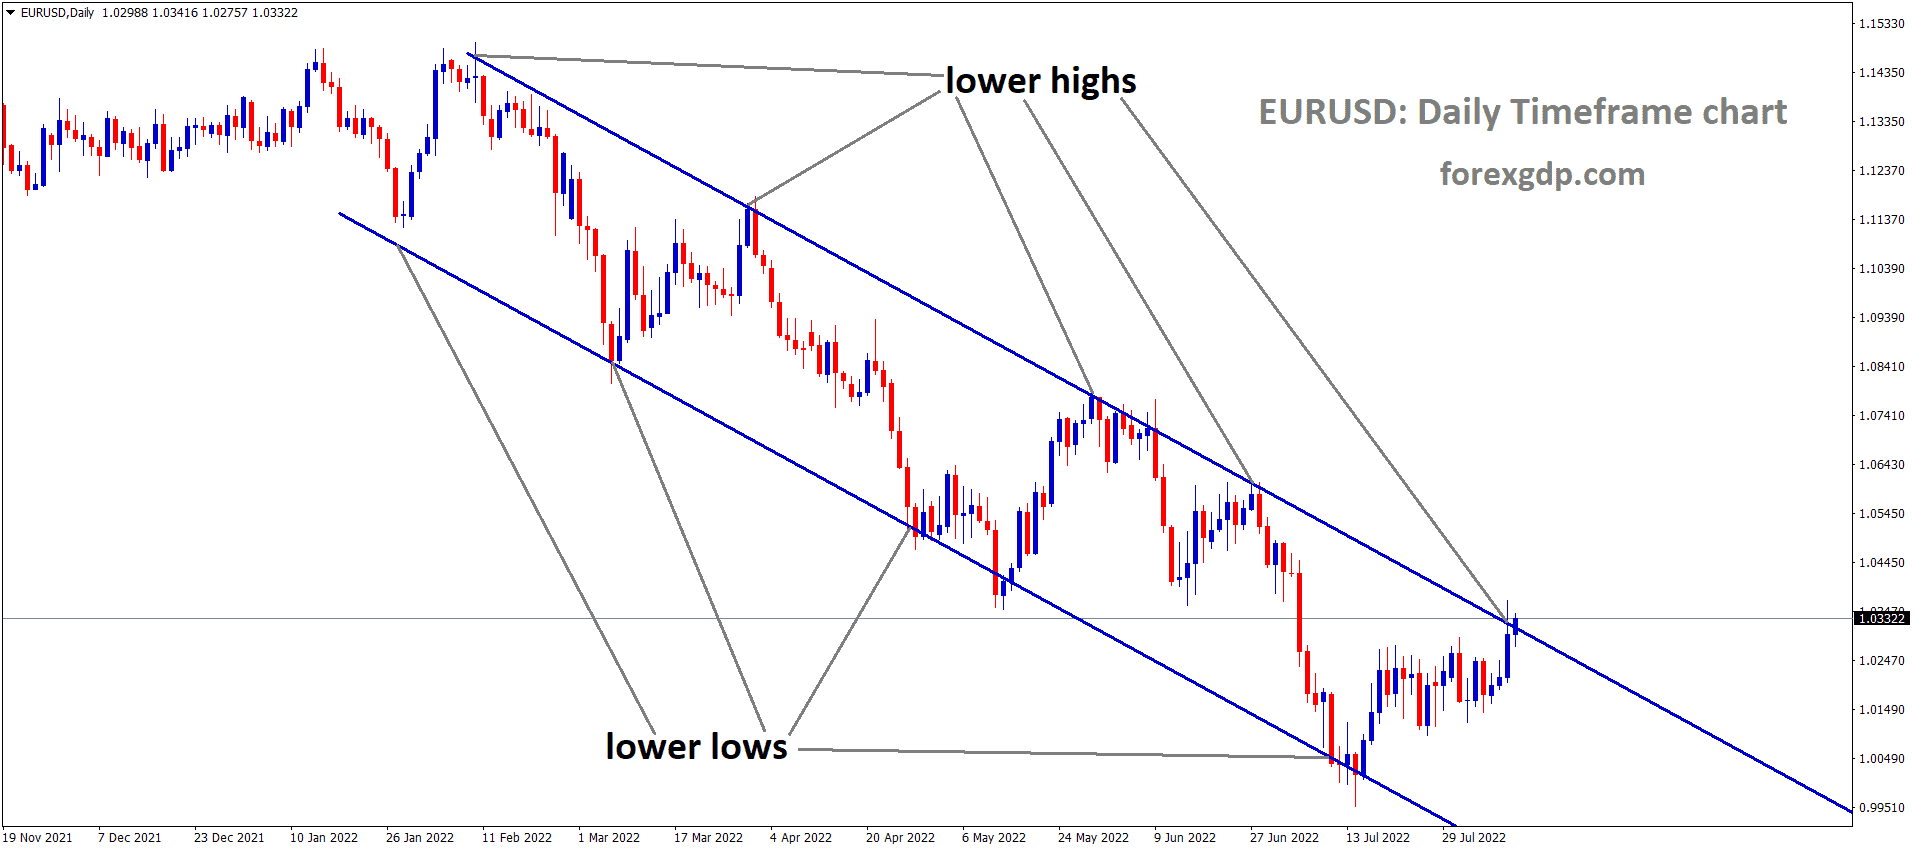 EURUSD is moving in the Descending channel and the market has reached the Lower high area of the channel 1